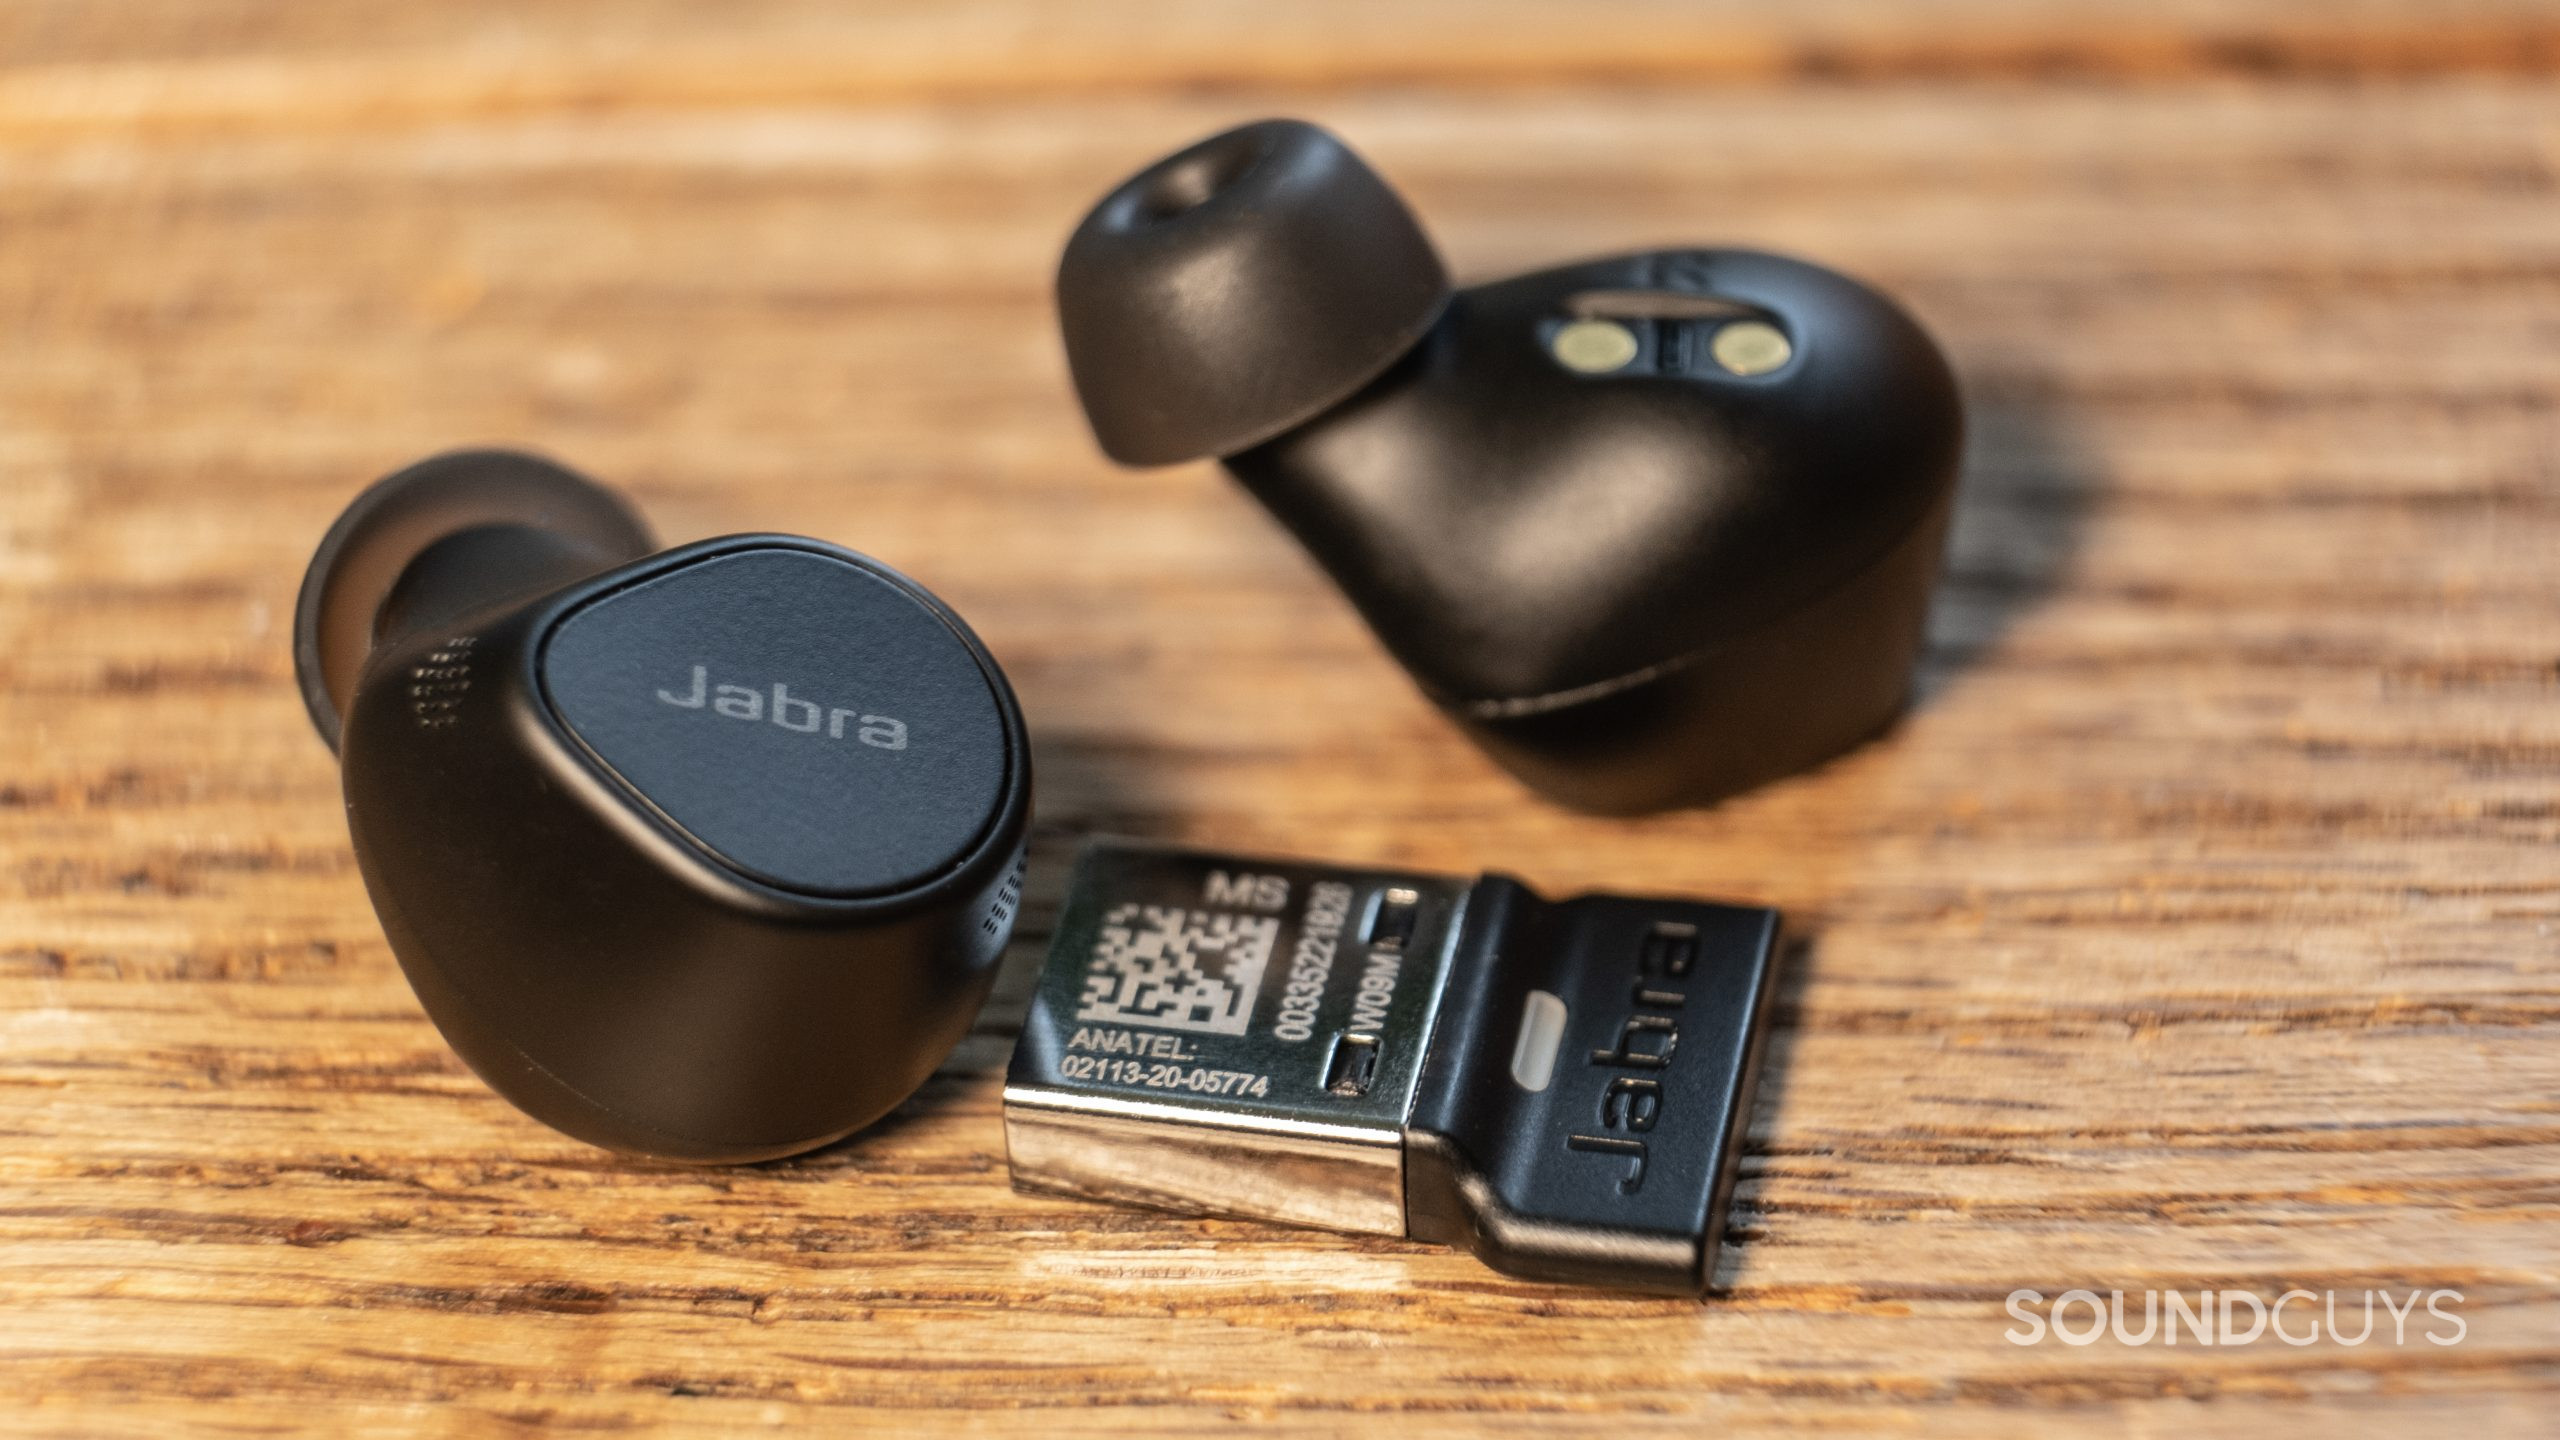 A close up shows the Jabra Evolve2 Buds and dongle out of the case on a wood surface.